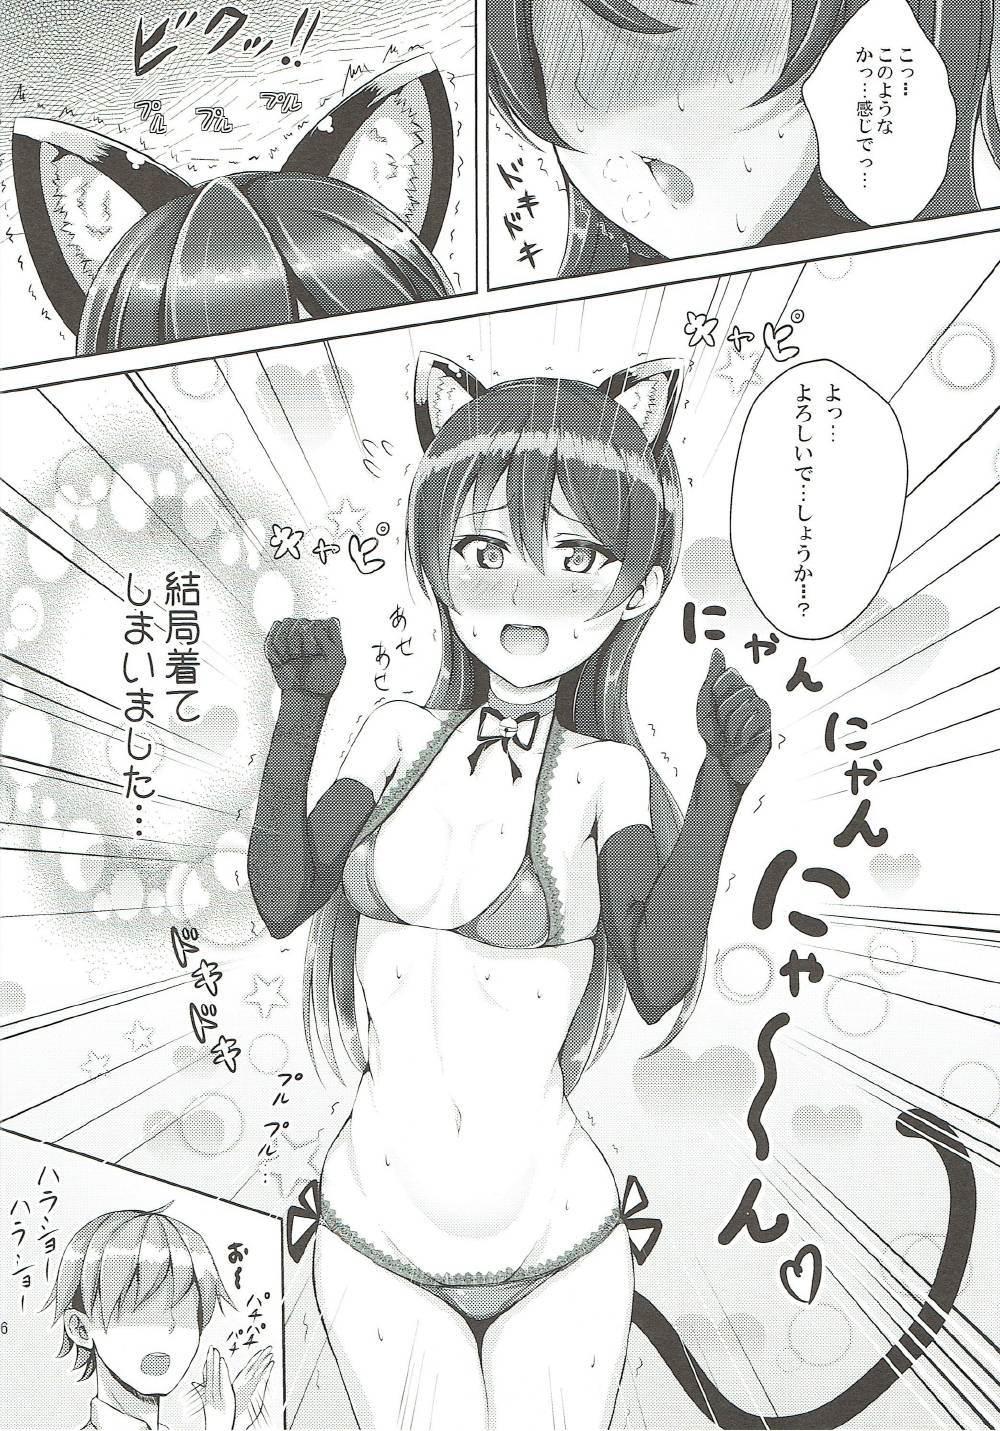 The Umi-chan to Nyannyan - Love live Gay Massage - Page 4